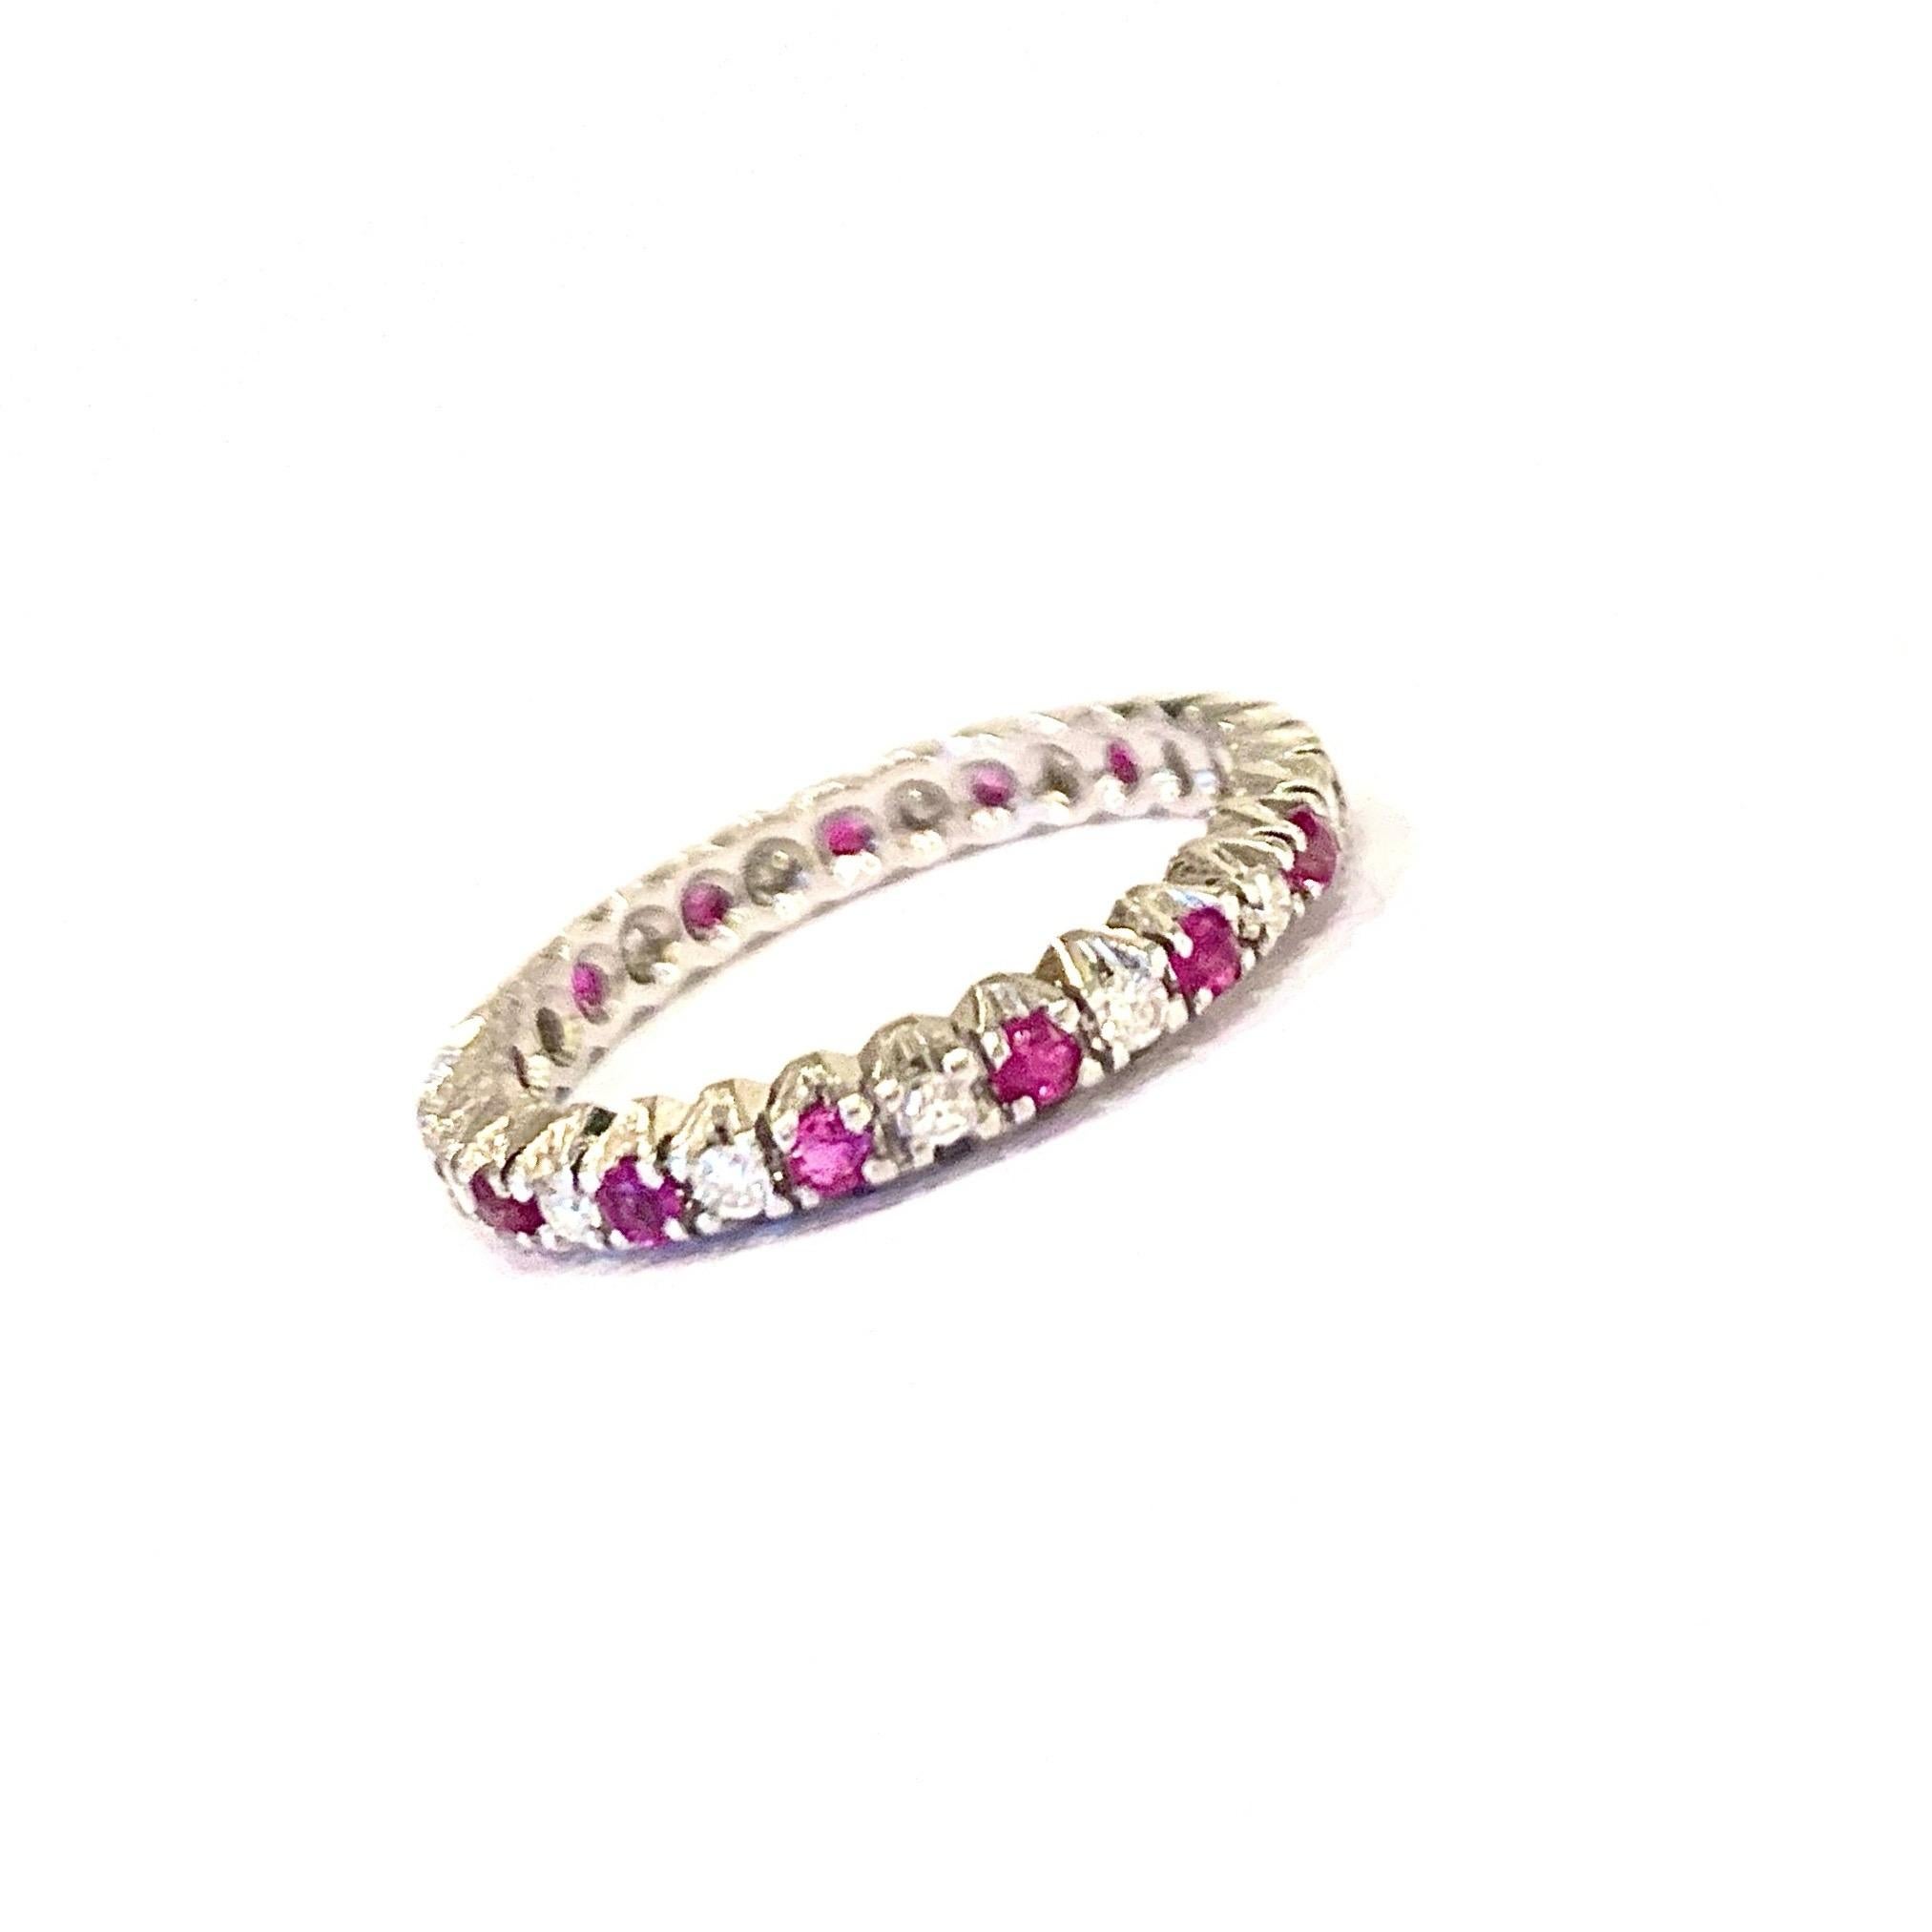 Elegant wedding band in white gold set with rubies and diamonds in full turn.

Total weight of diamonds: 0.15 carats

Total weight of rubies: 0.15 carats

Finger size: 52 (US size: 6)

18 karat white gold, 750/1000ths